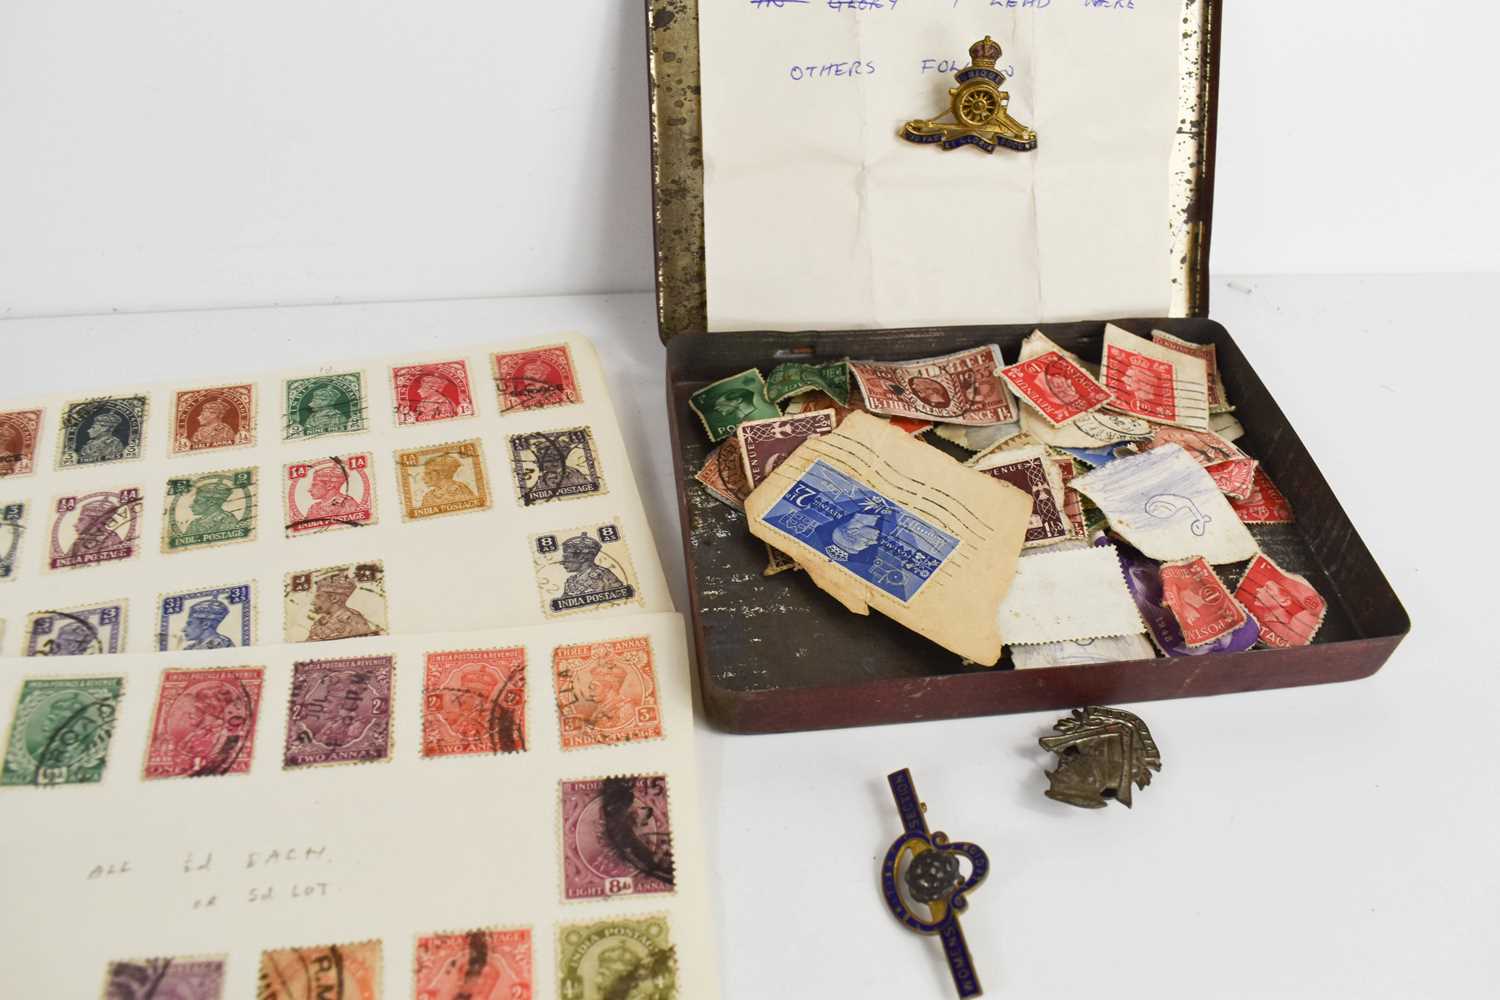 An album of stamps including Edwardian examples, loose stamps, military badges and Wade Whimsies. - Image 2 of 2